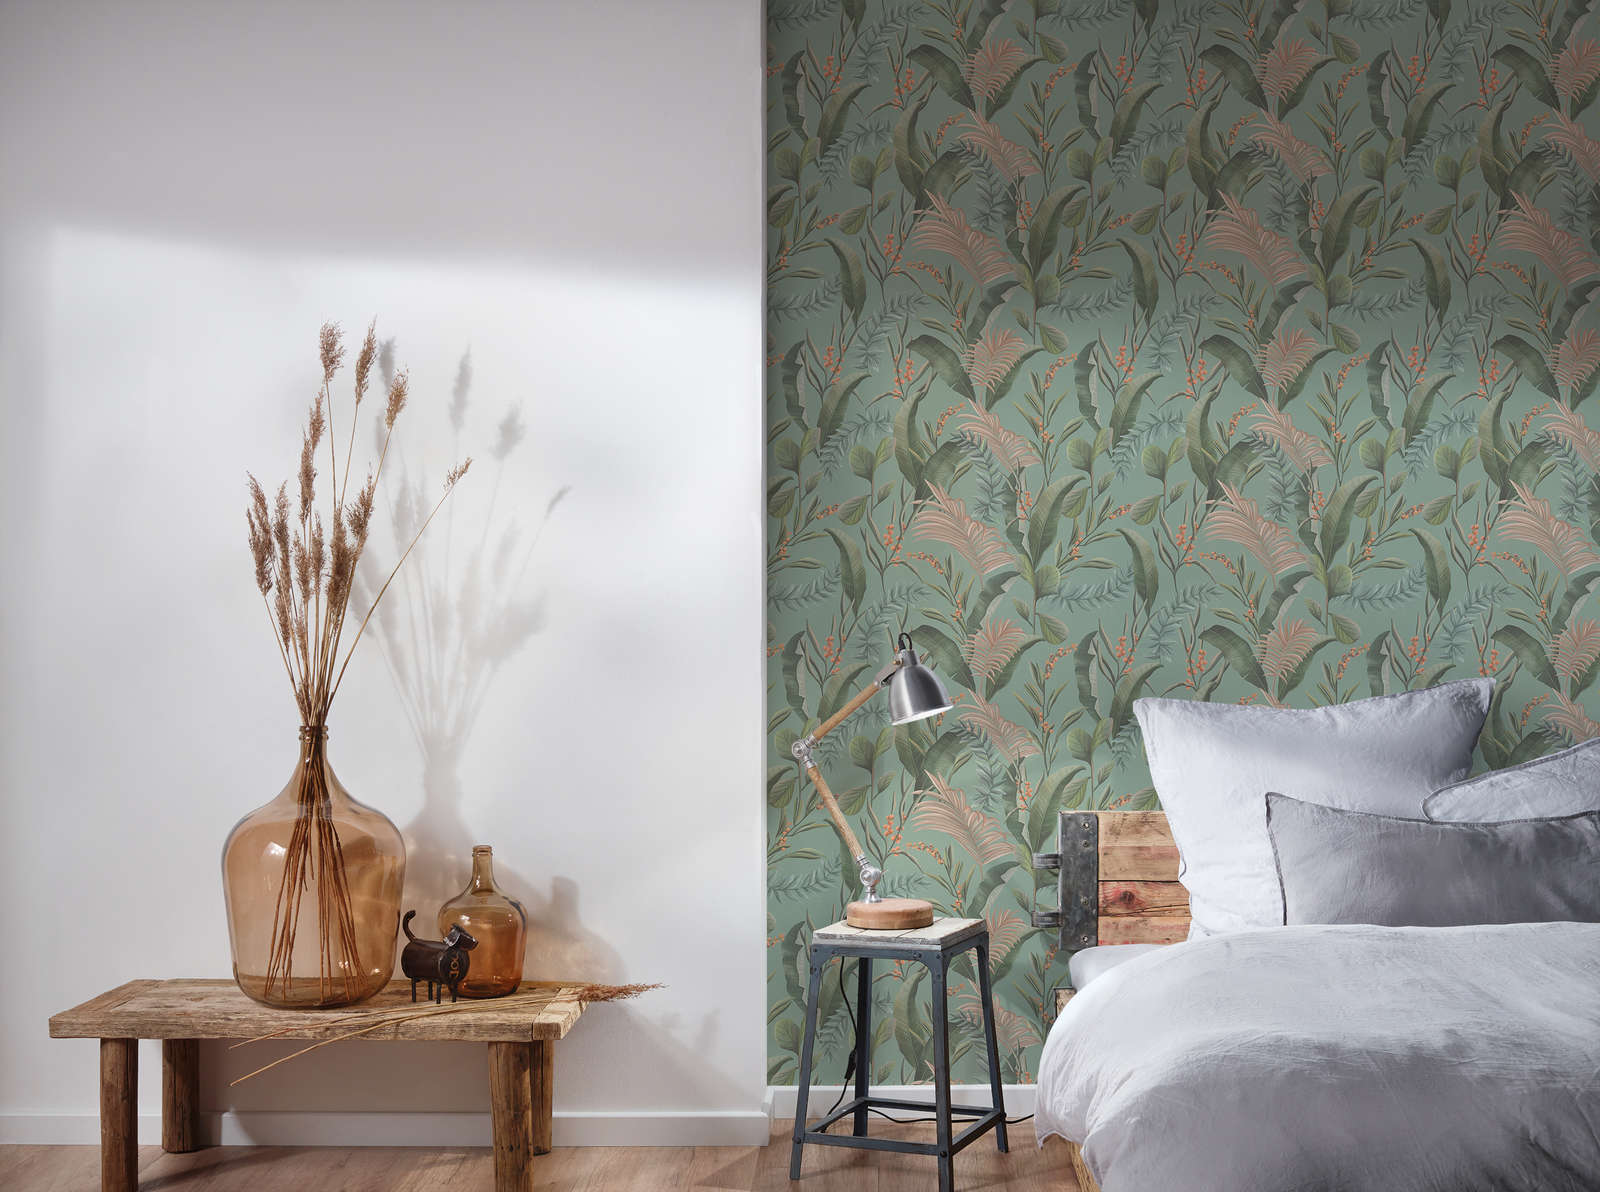             Floral style jungle wallpaper with leaves textured matt - blue, green, beige
        